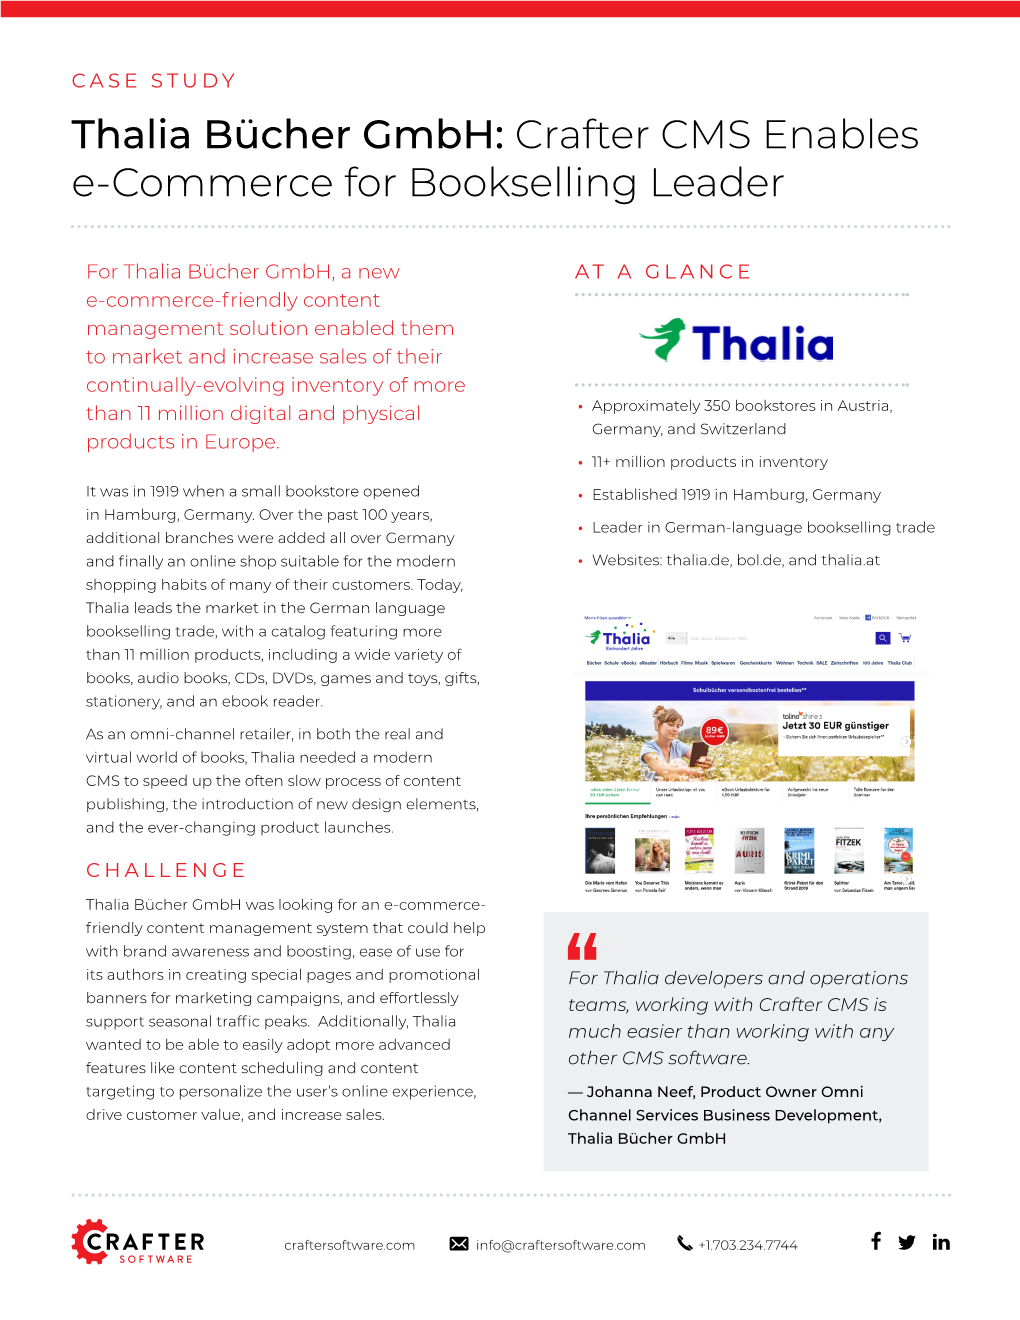 Thalia Bücher Gmbh: Crafter CMS Enables E-Commerce for Bookselling Leader